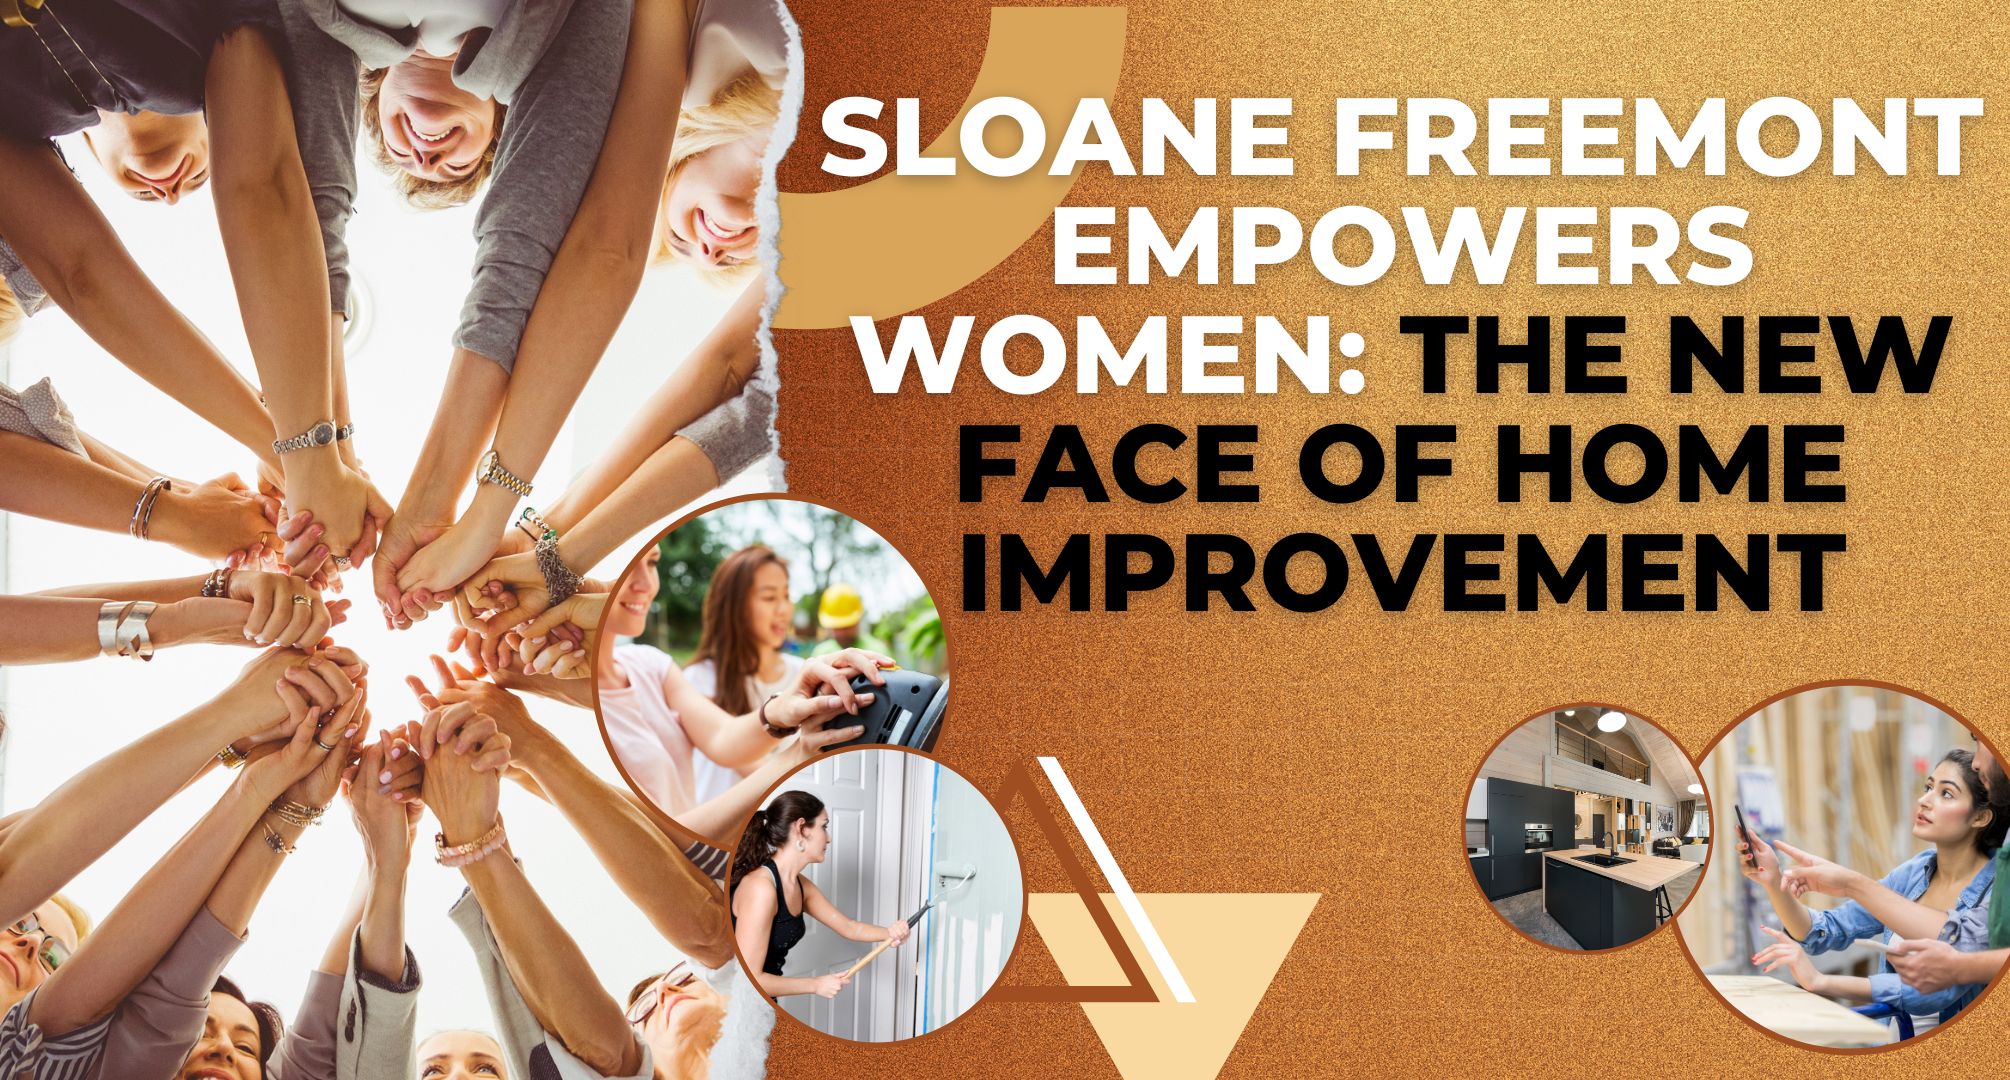 Sloane Freemont Empowers Women The New Face of Home Improvement